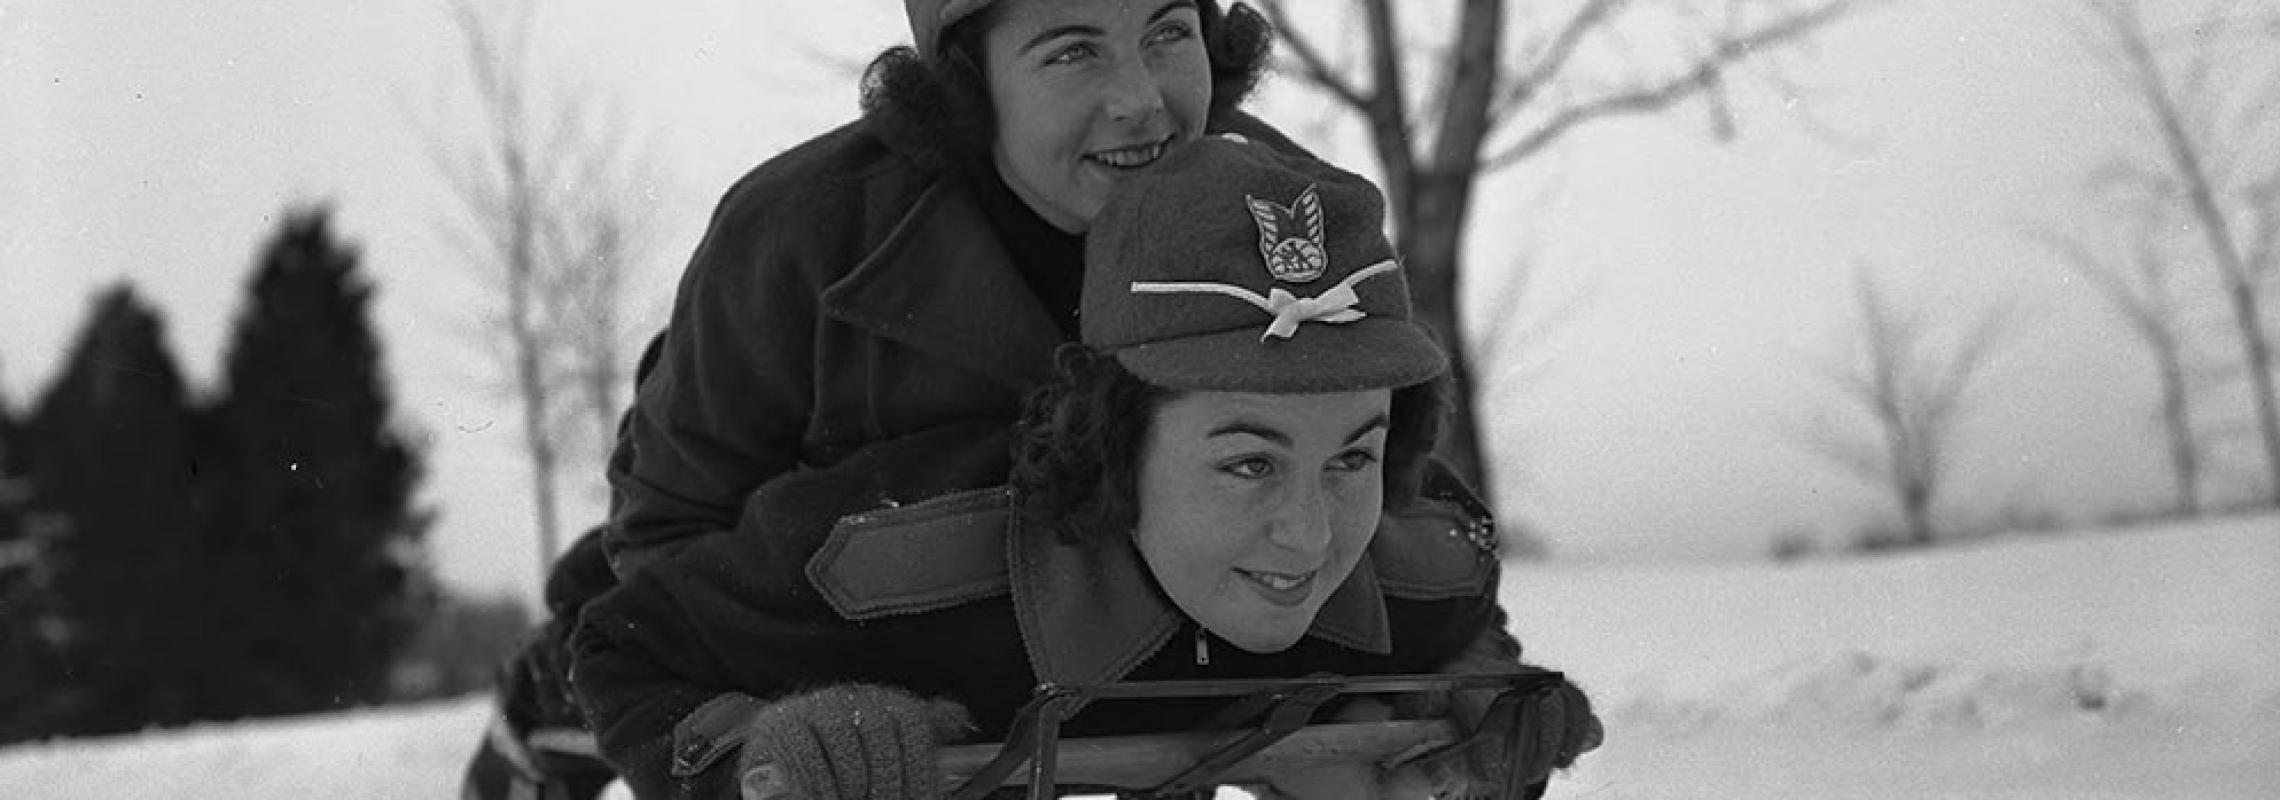 Photograph of Two Girls Sledding in Snow by Witman